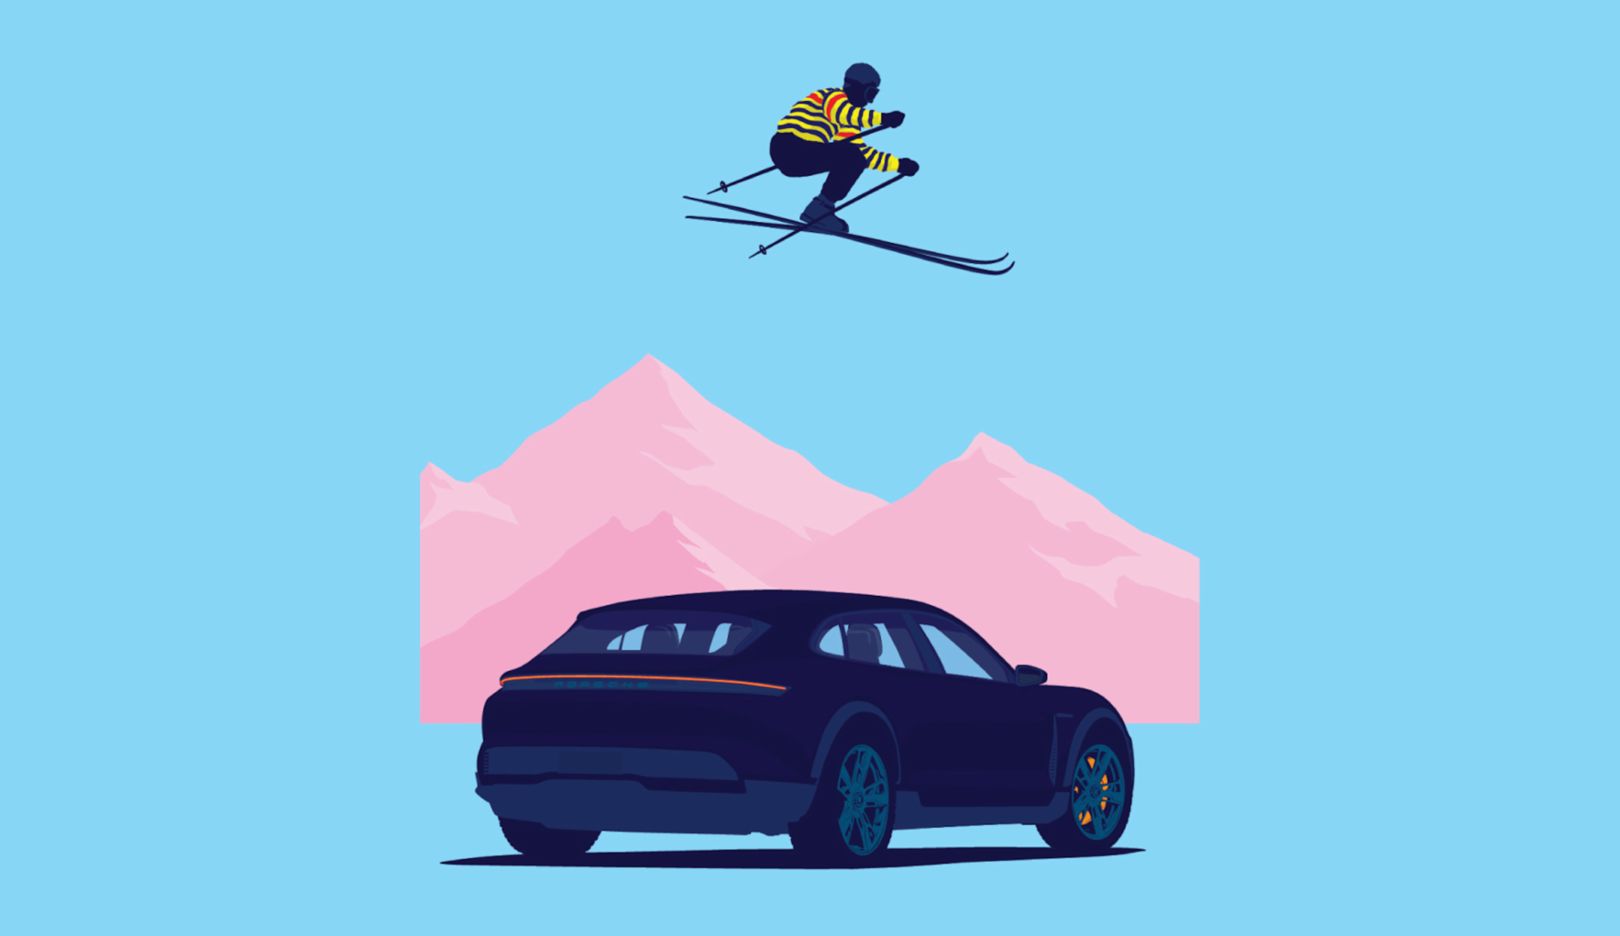 An iconic Porsche moment has to be the ski jump over the Porsche 356 in 1960. In the new interpretation for the cover, the Taycan 4 Cross Turismo was the obvious choice to replace the 356. “The yellow striped top on the skier is a subtle nod back to the cover of issue number 1,” Jeffrey Docherty explains this detail.